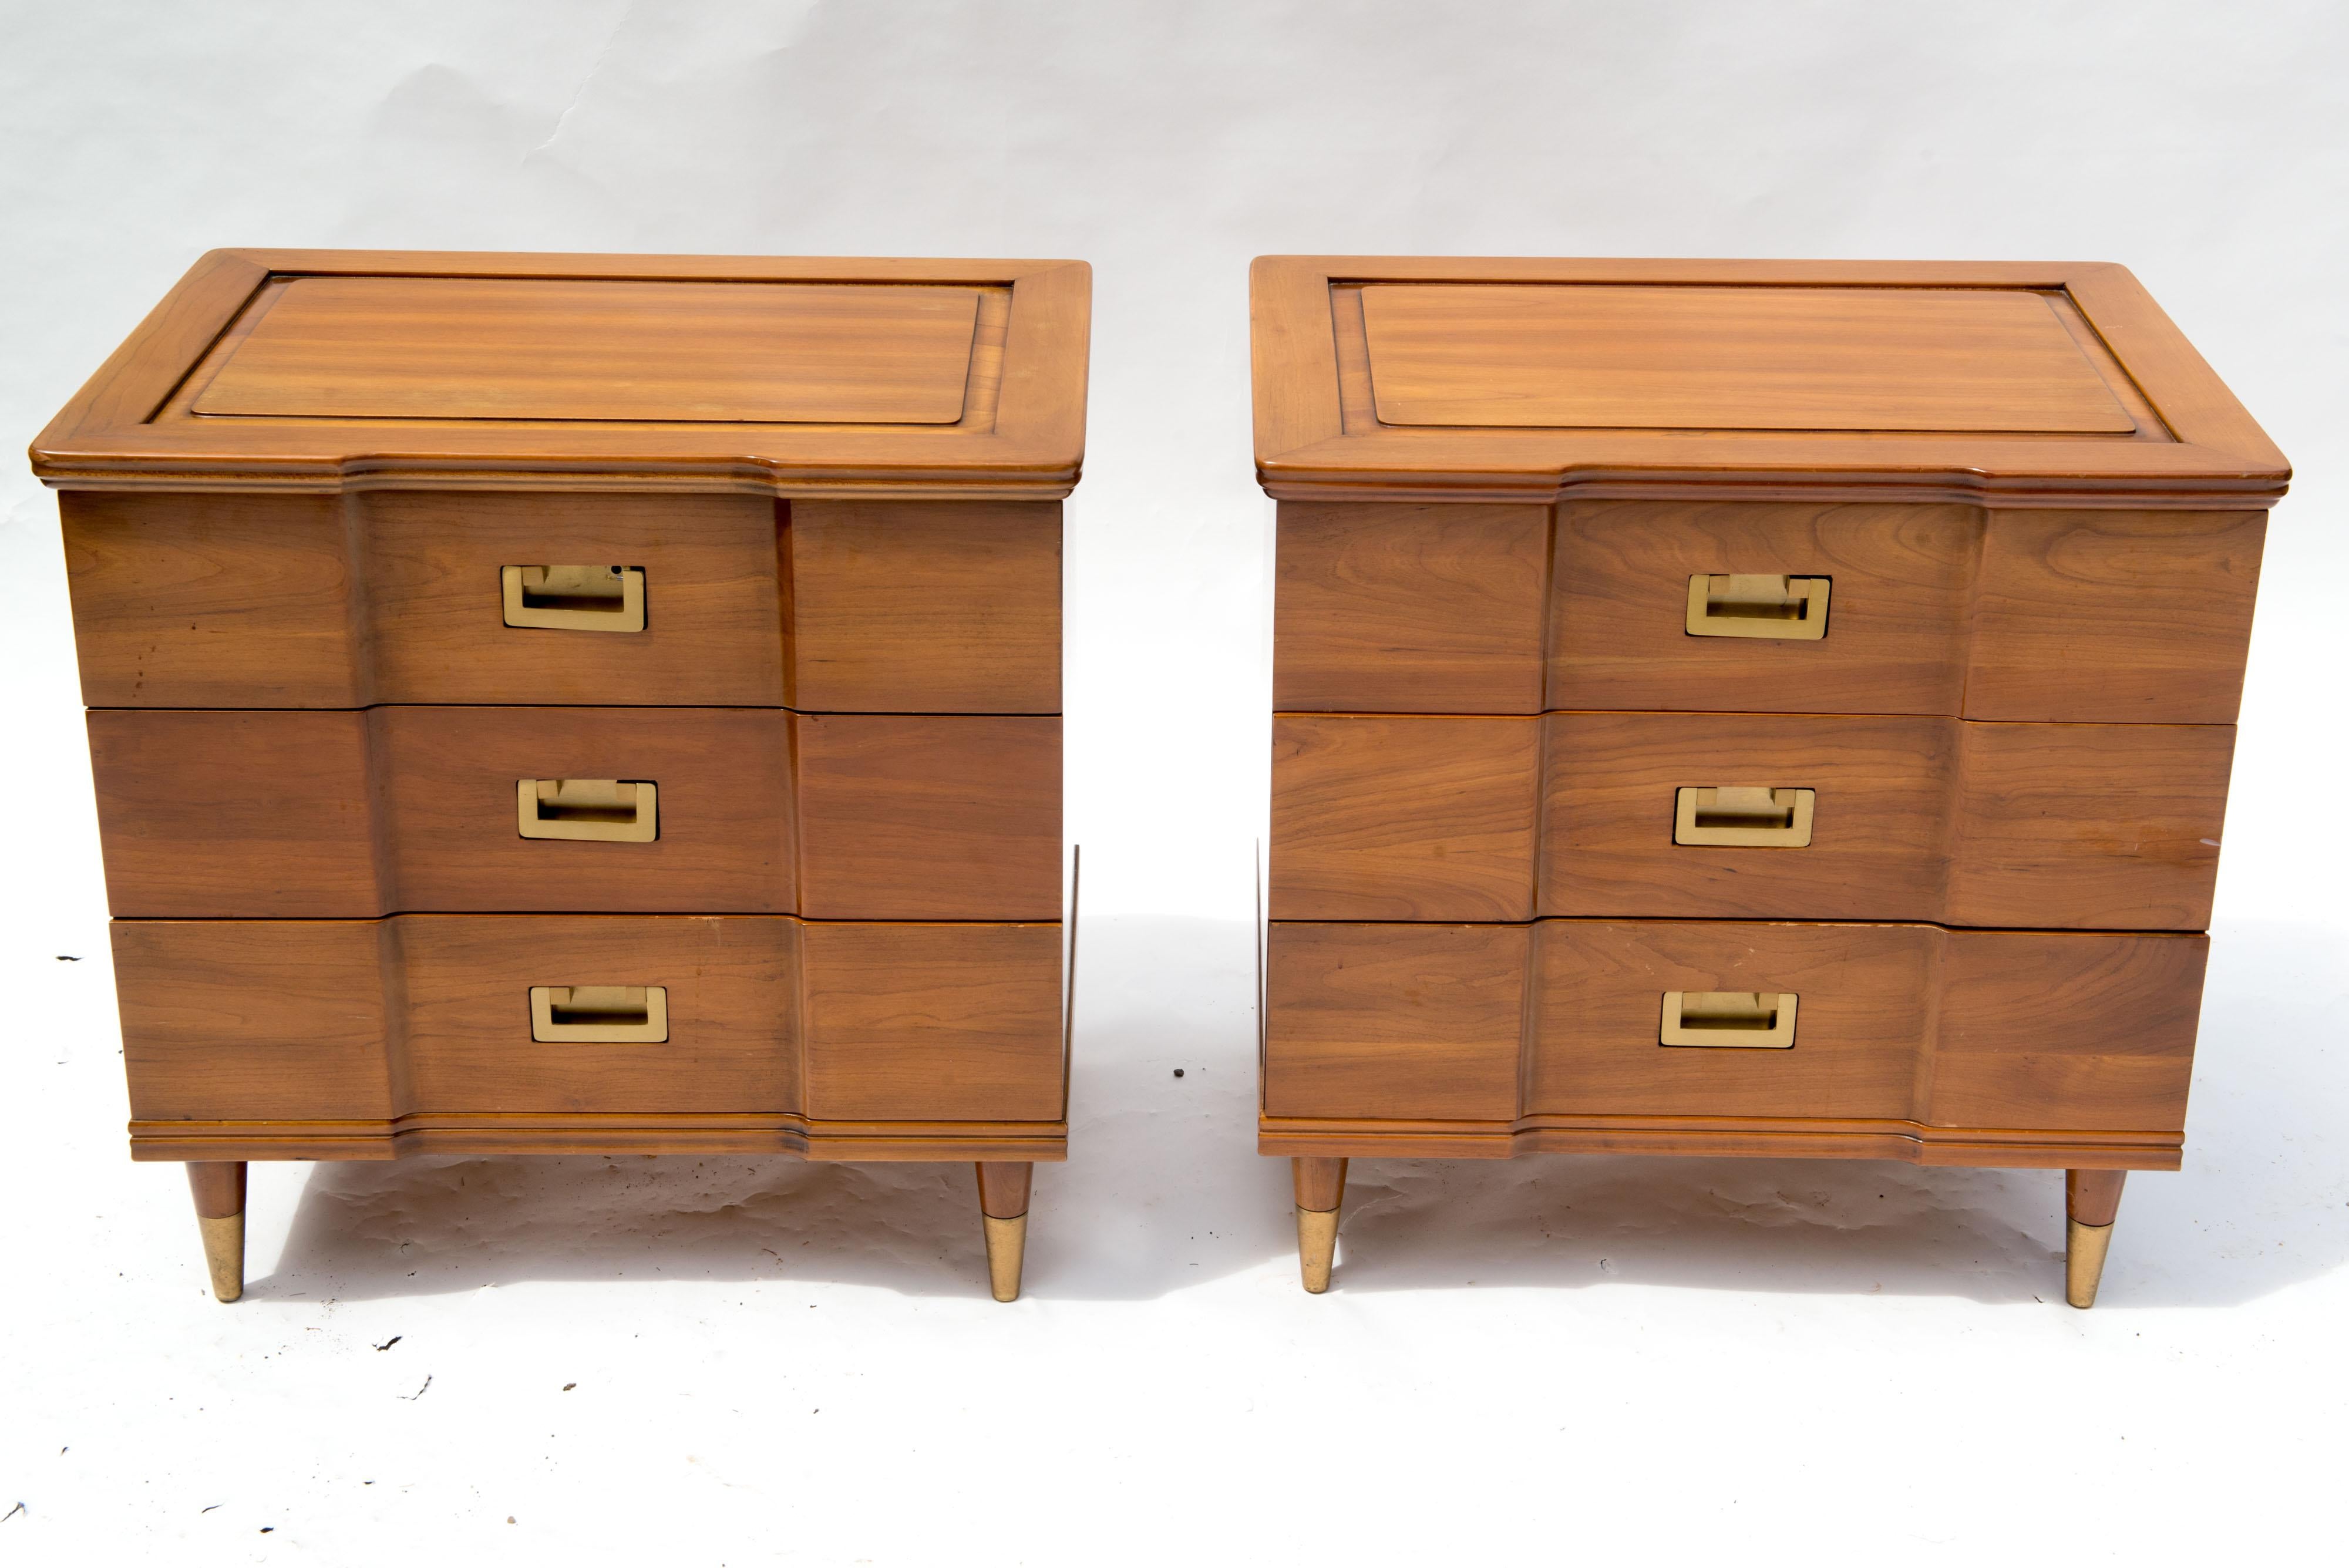 An exceptional pair of Mid-Century Modern John Widdicomb three drawer nightstands. Made of solid cherry wood with solid brass drawer pulls and tapered capped brass feet. The backs of these cabinets are finished, allowing them to stand free in any